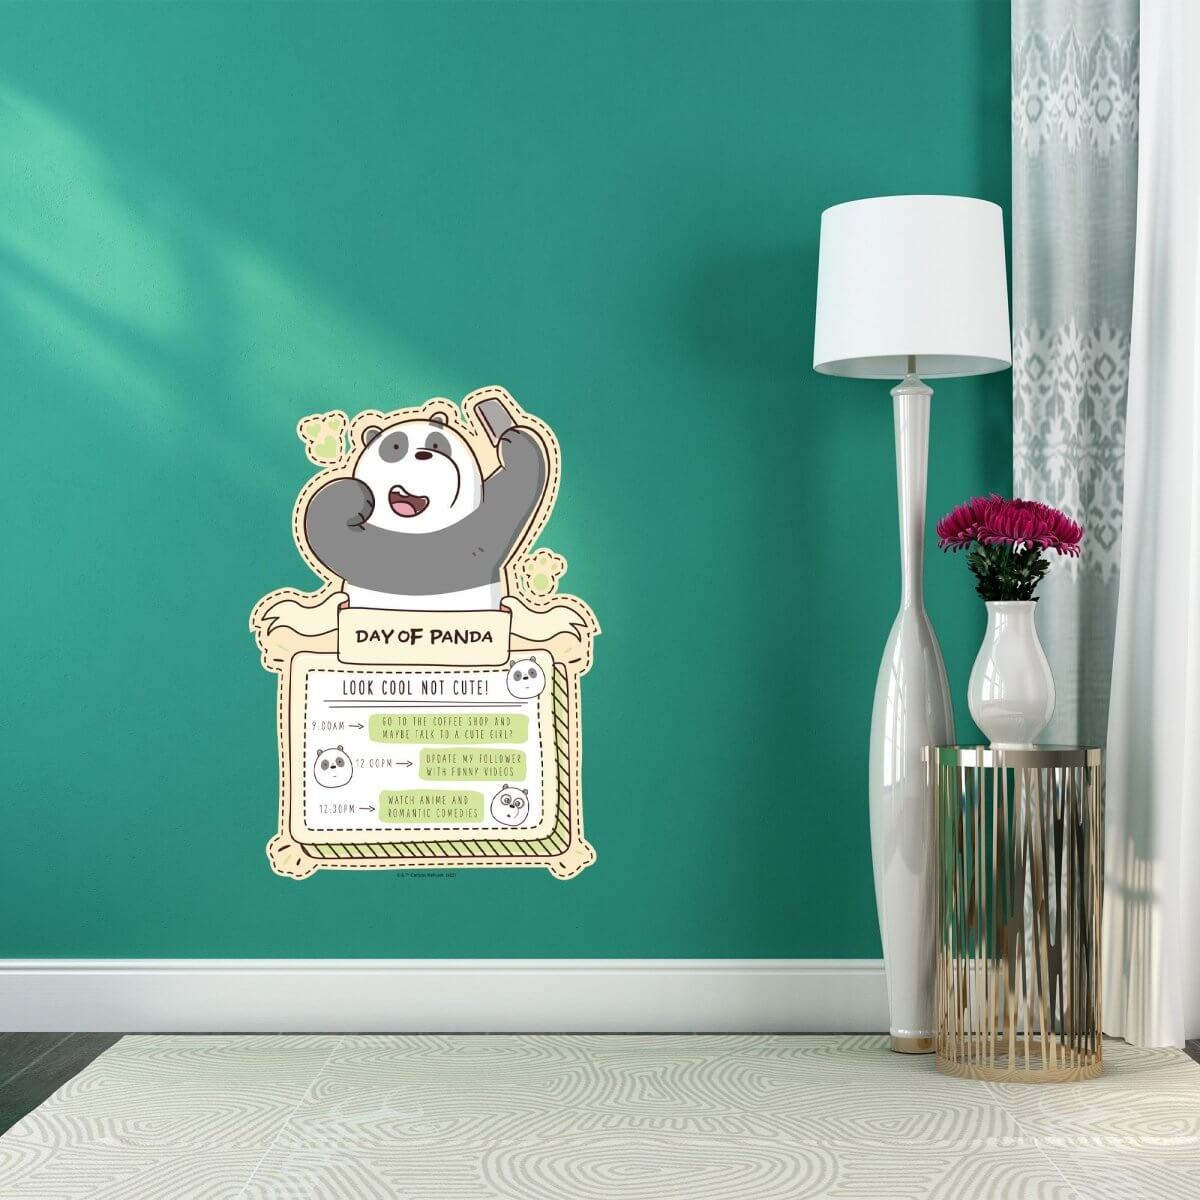 Kismet Decals Home & Room Decor We Bare Bears Panda's Day Wall decal sticker - officially licensed - latex printed with no solvent odor - Kismet Decals